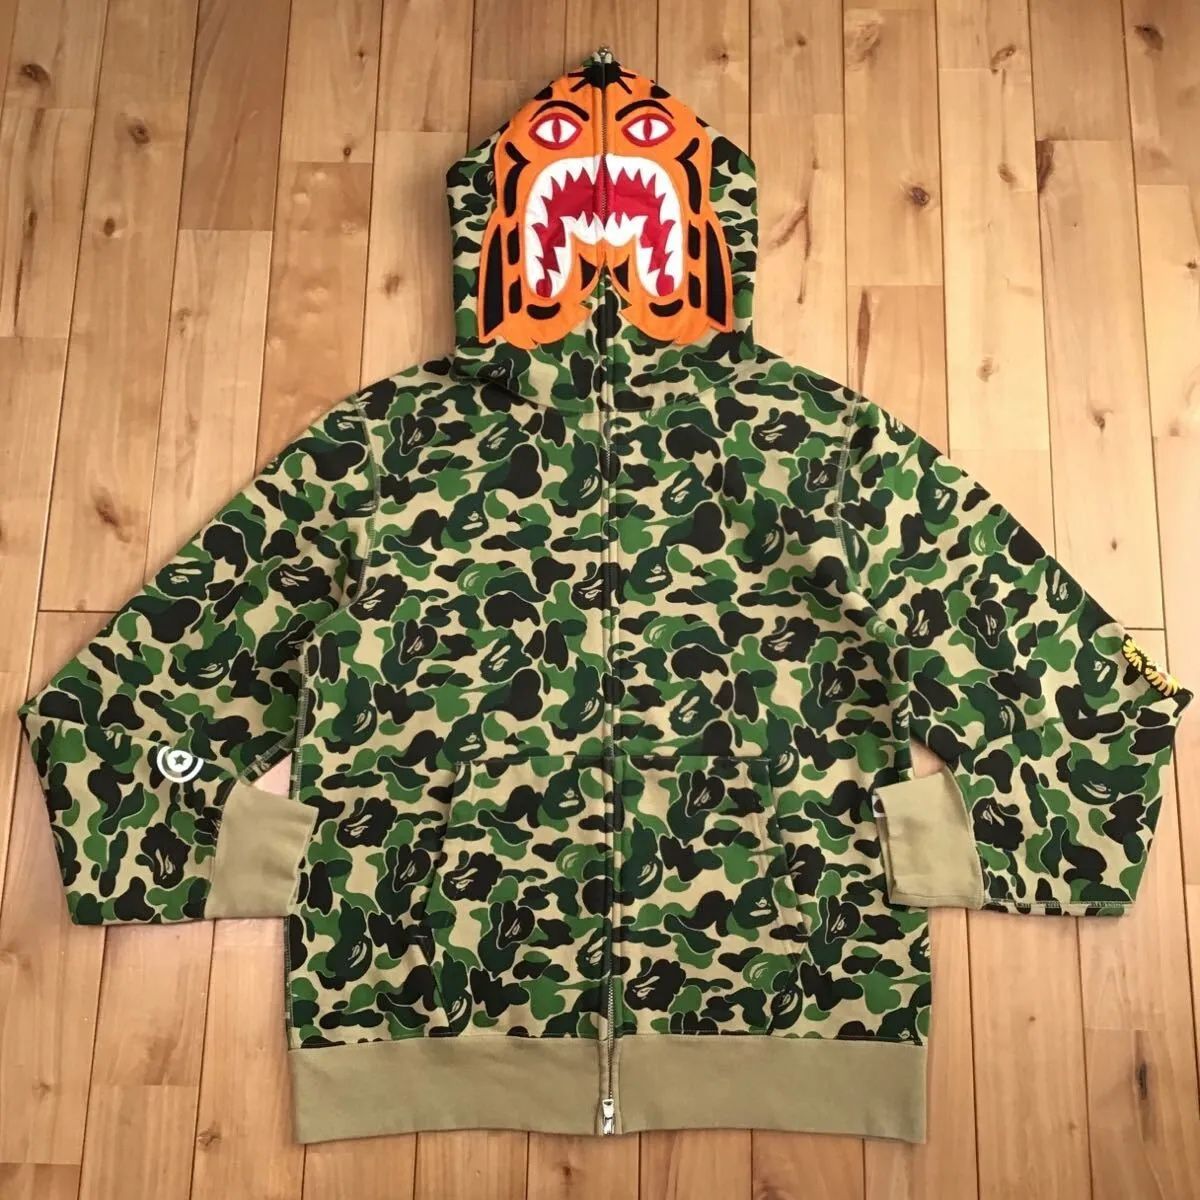 Bape Hoodie “Tiger” for Sale in Miami Gardens, FL - OfferUp